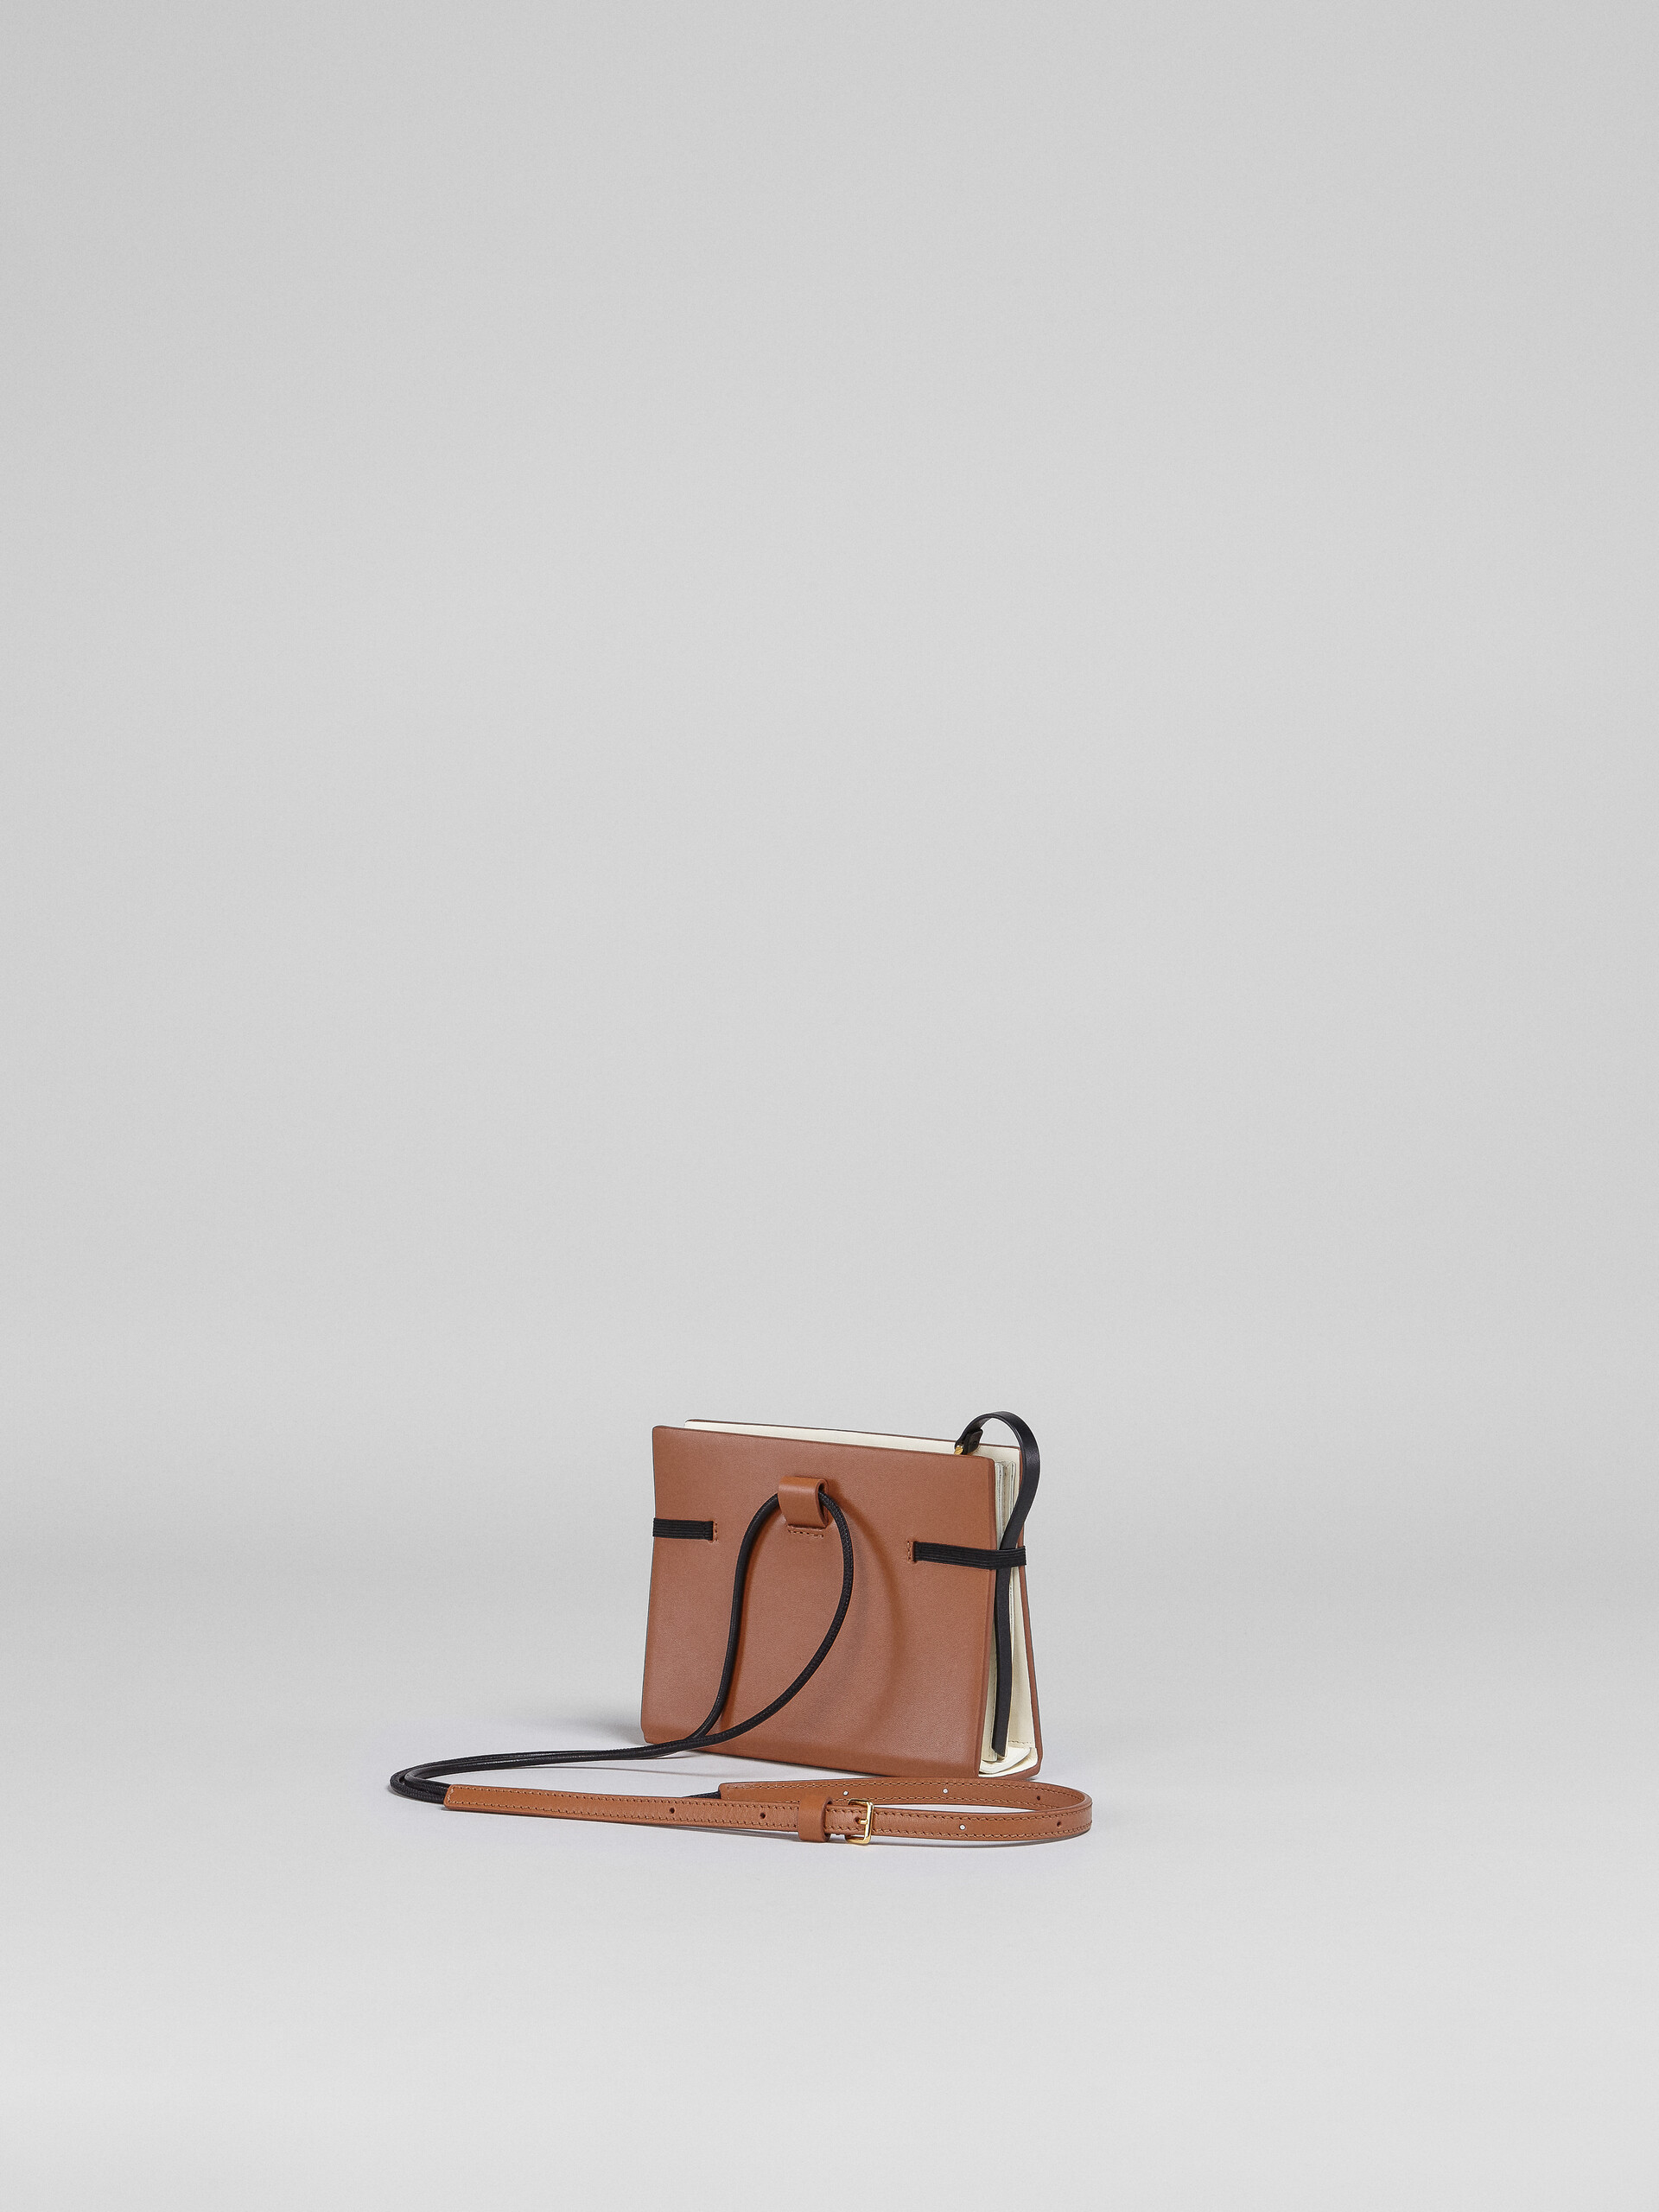 Brown and white leather clutch - Beutel - Image 3